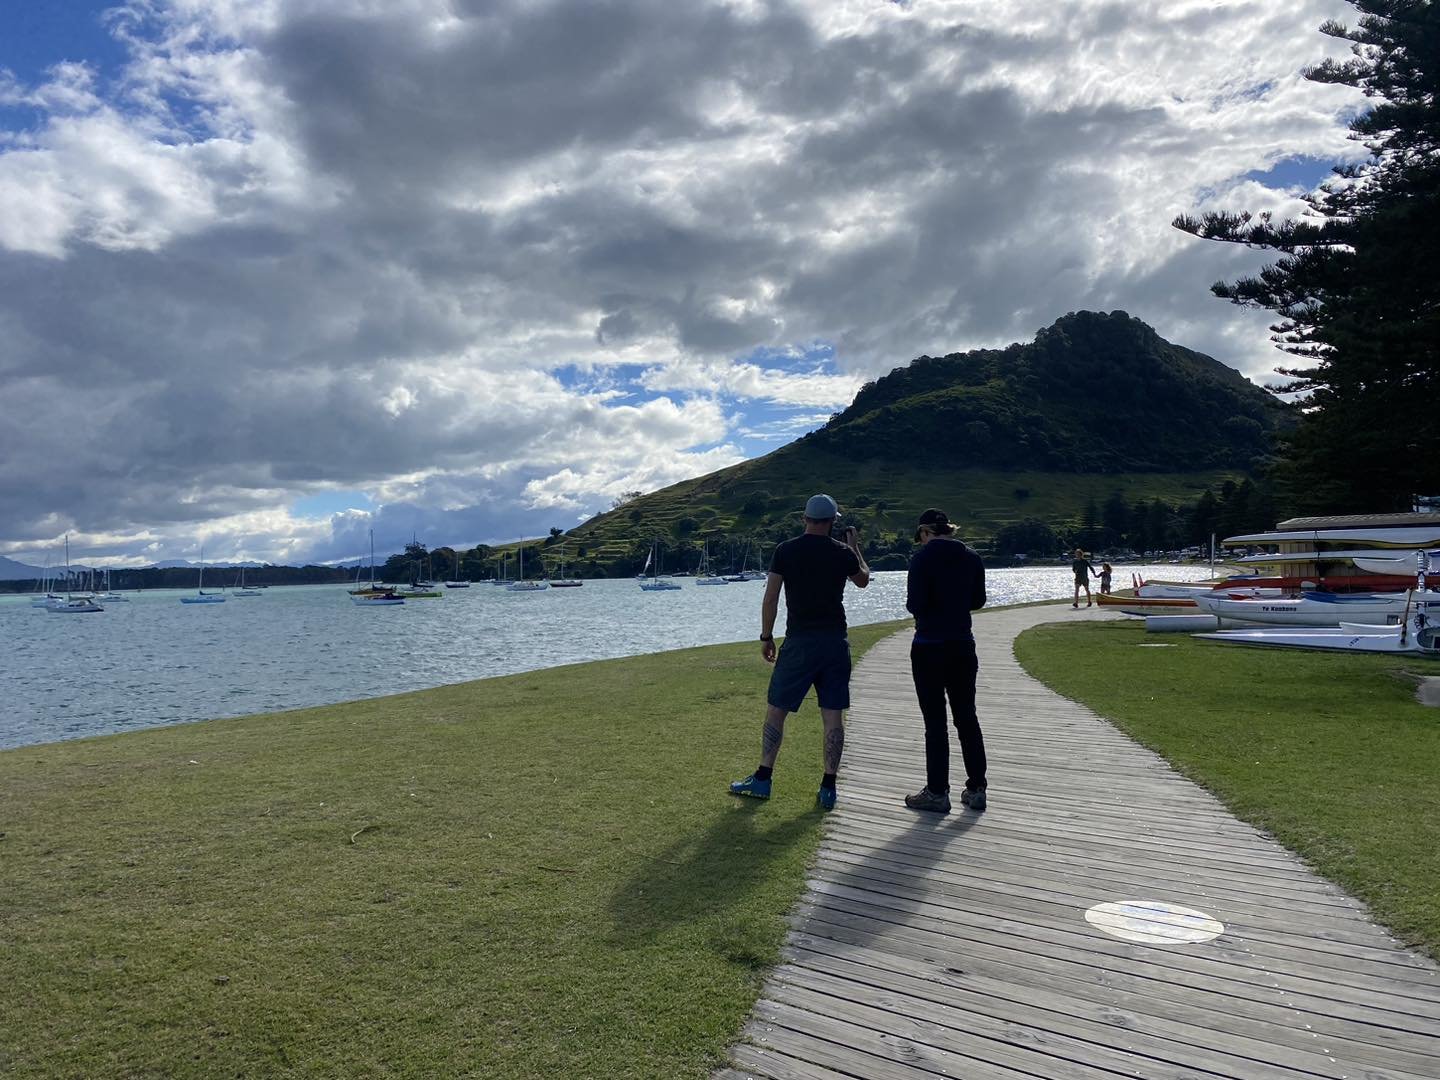 Absolute pleasure to show our associates from Bournemouth University and Forestry England the stunning archaeology we have on our doorstep at the Bay of Plenty! #pāpāmoa #māuao and #moturiki never disappoint 🤩😍